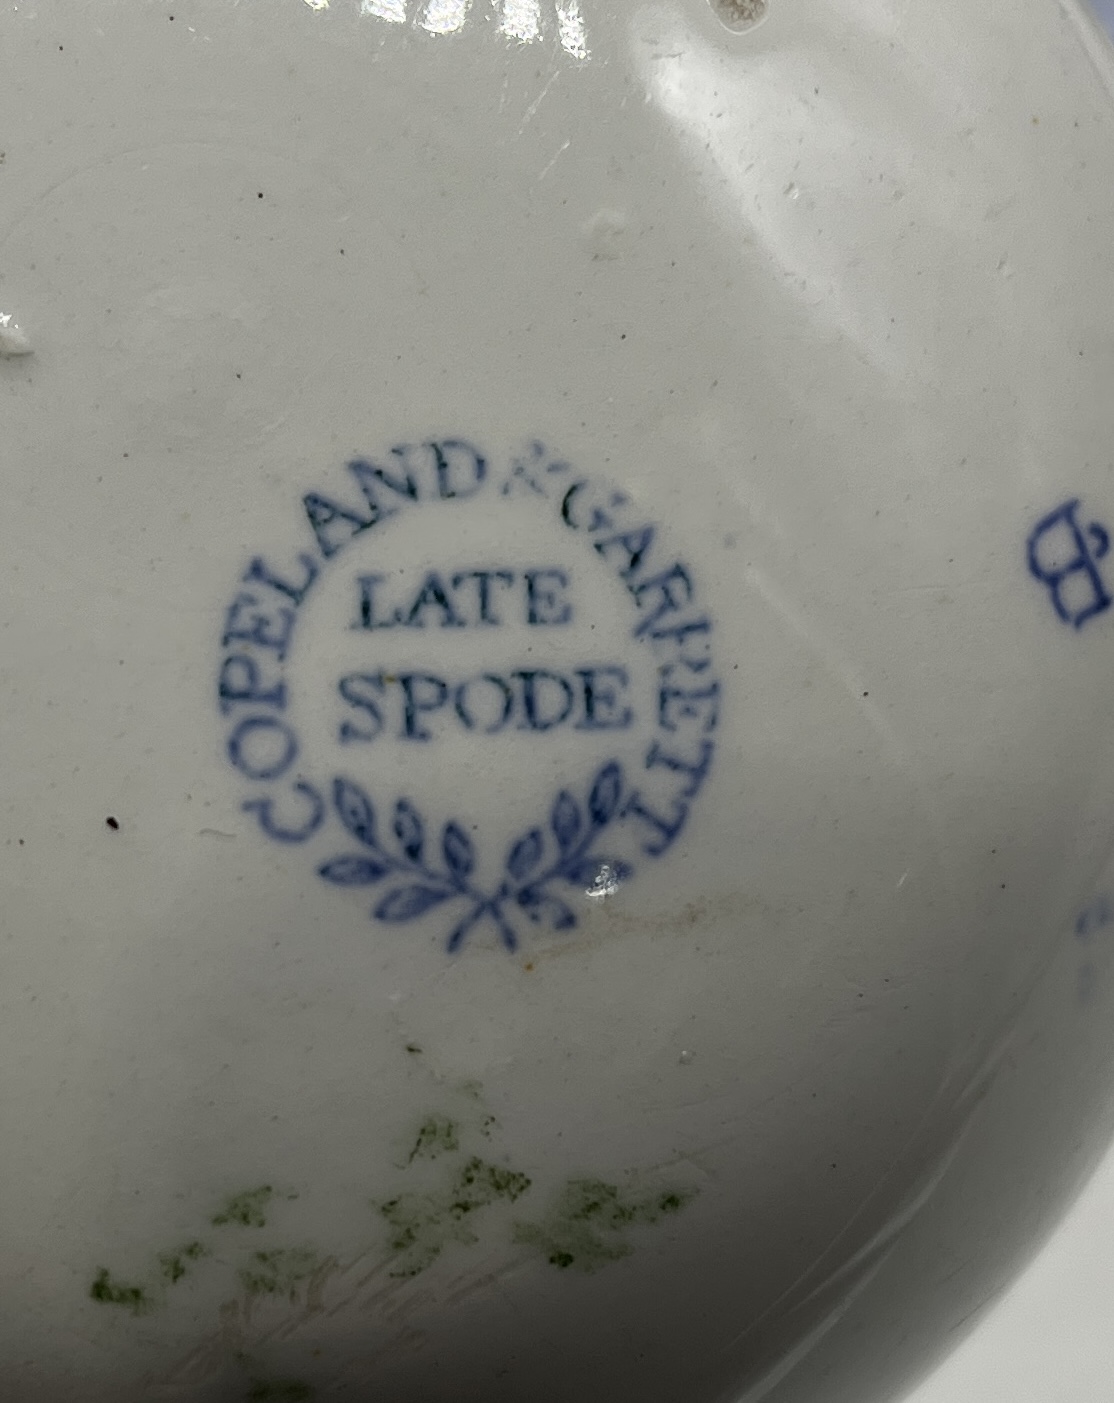 A Spode & Garrett "Old Spode" blue and white lidded tureen with dish and ladle along with a bohemian - Image 5 of 5